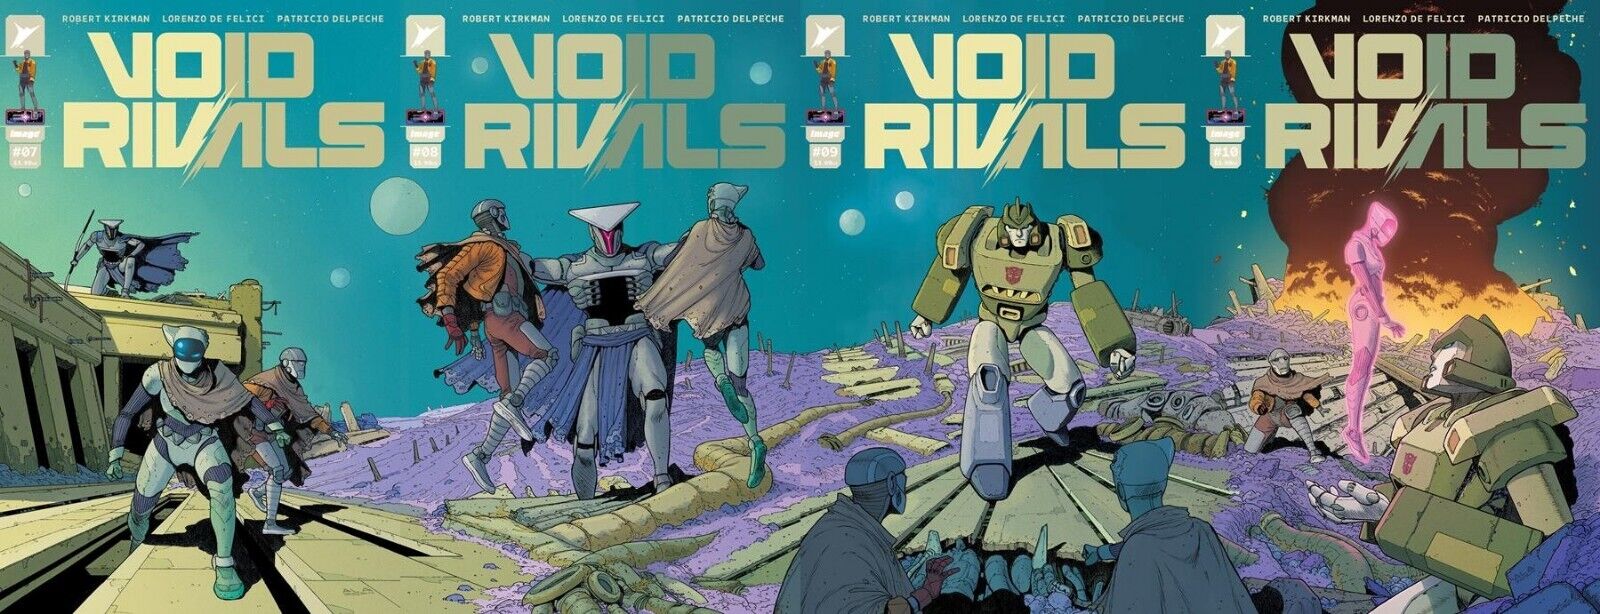 VOID RIVALS 7 8 9 & 10 1:10 CONNECTING VARIANT SET NM TRANSFORMERS 